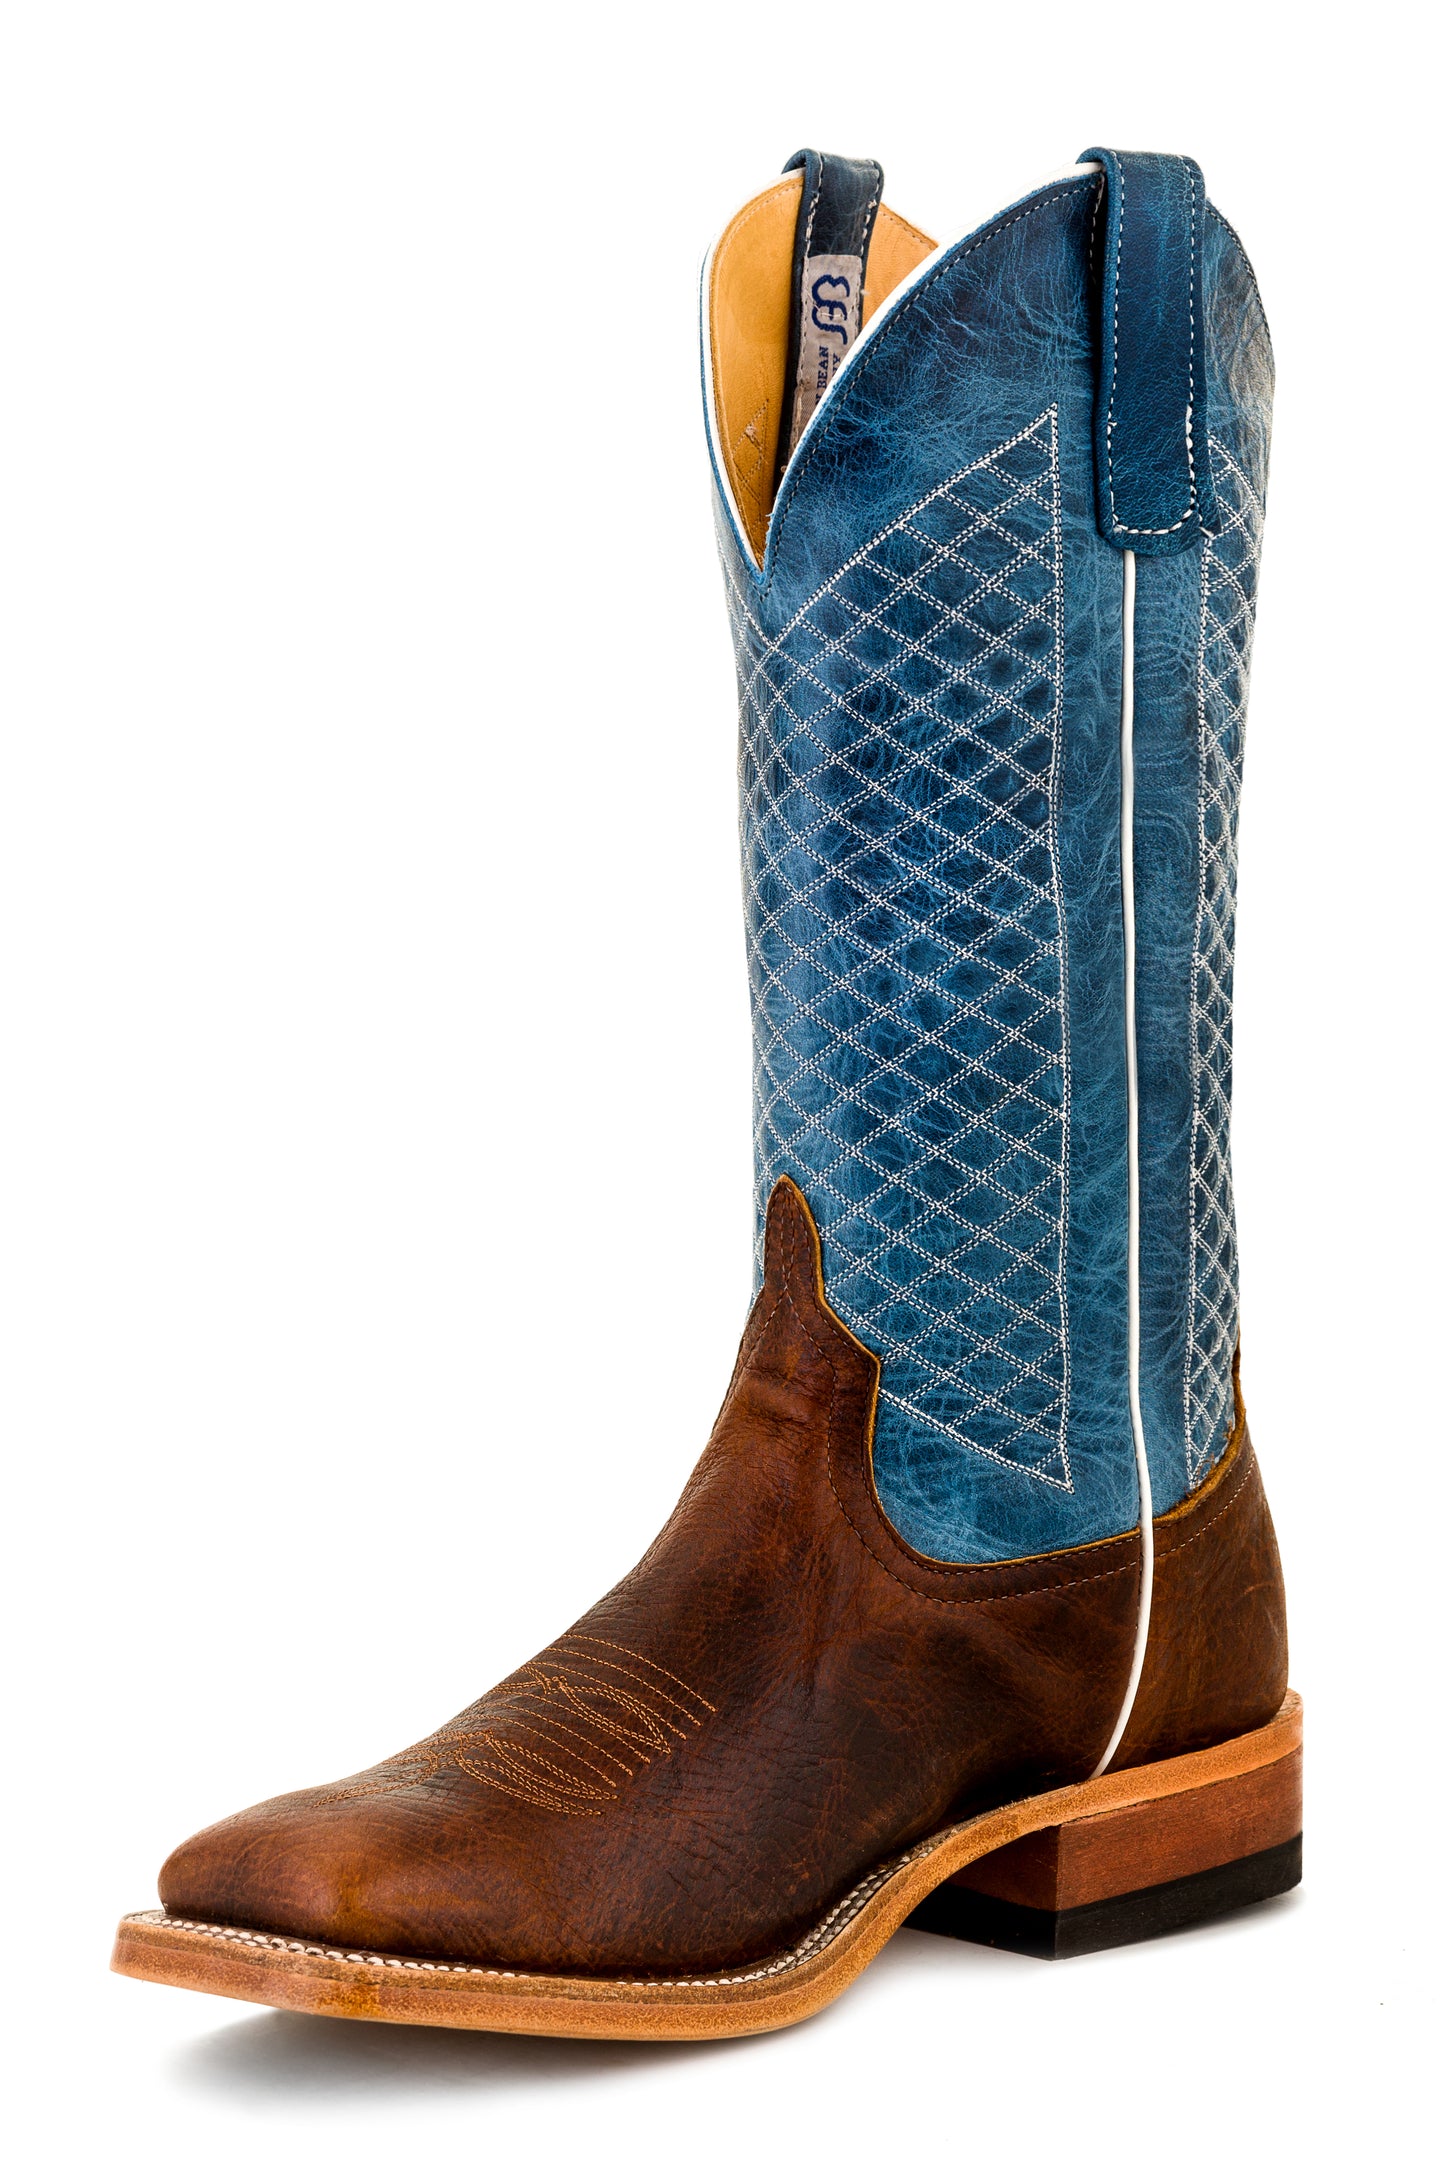 Anderson Bean Blue Lava/Mike Tyson Bison Boot